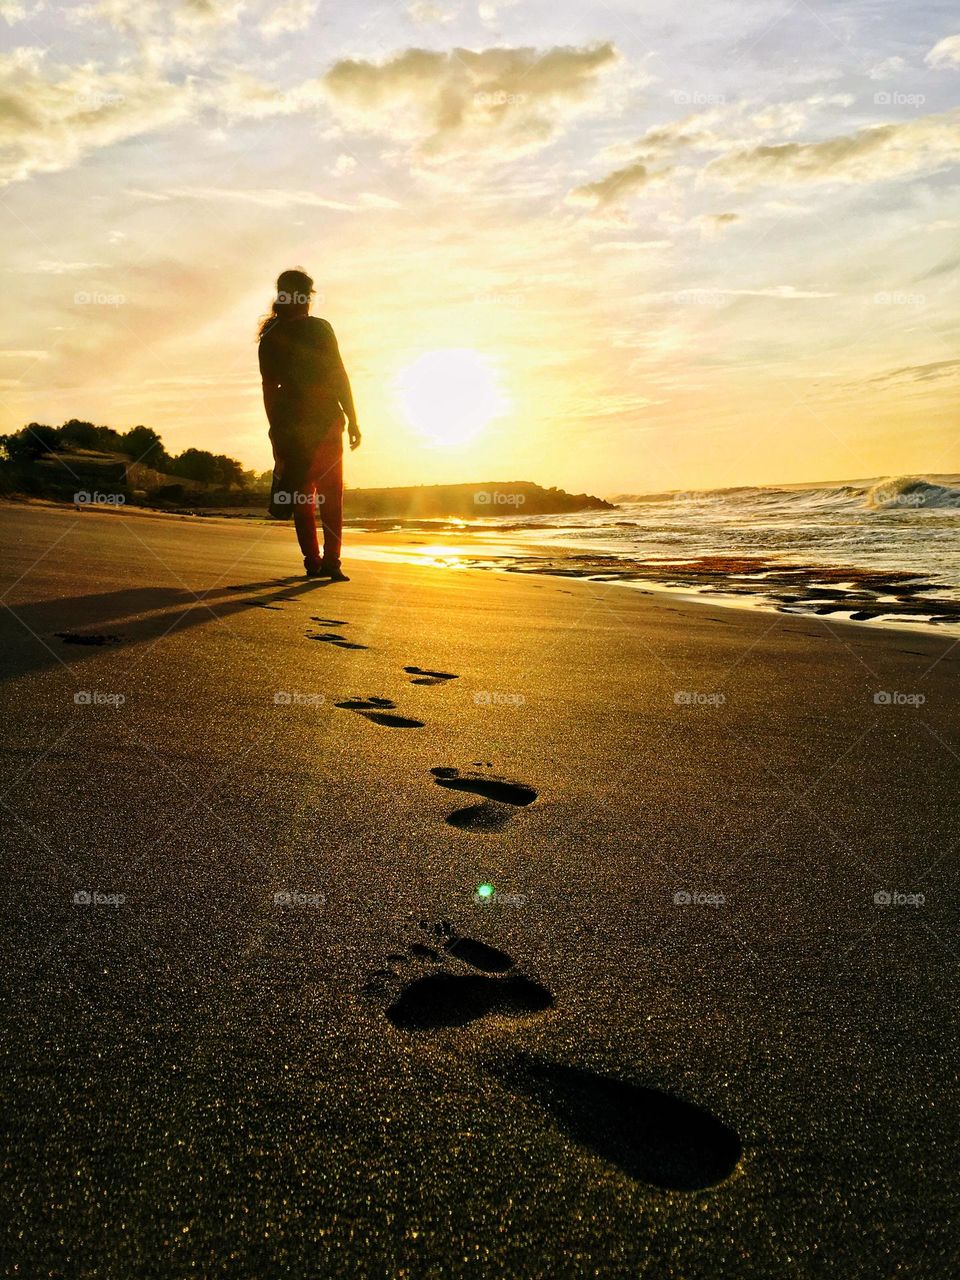 A woman walking in solitude towards the sun on a beach. Her foot prints are the only thing left behind. That too to be washed away by the waves. 